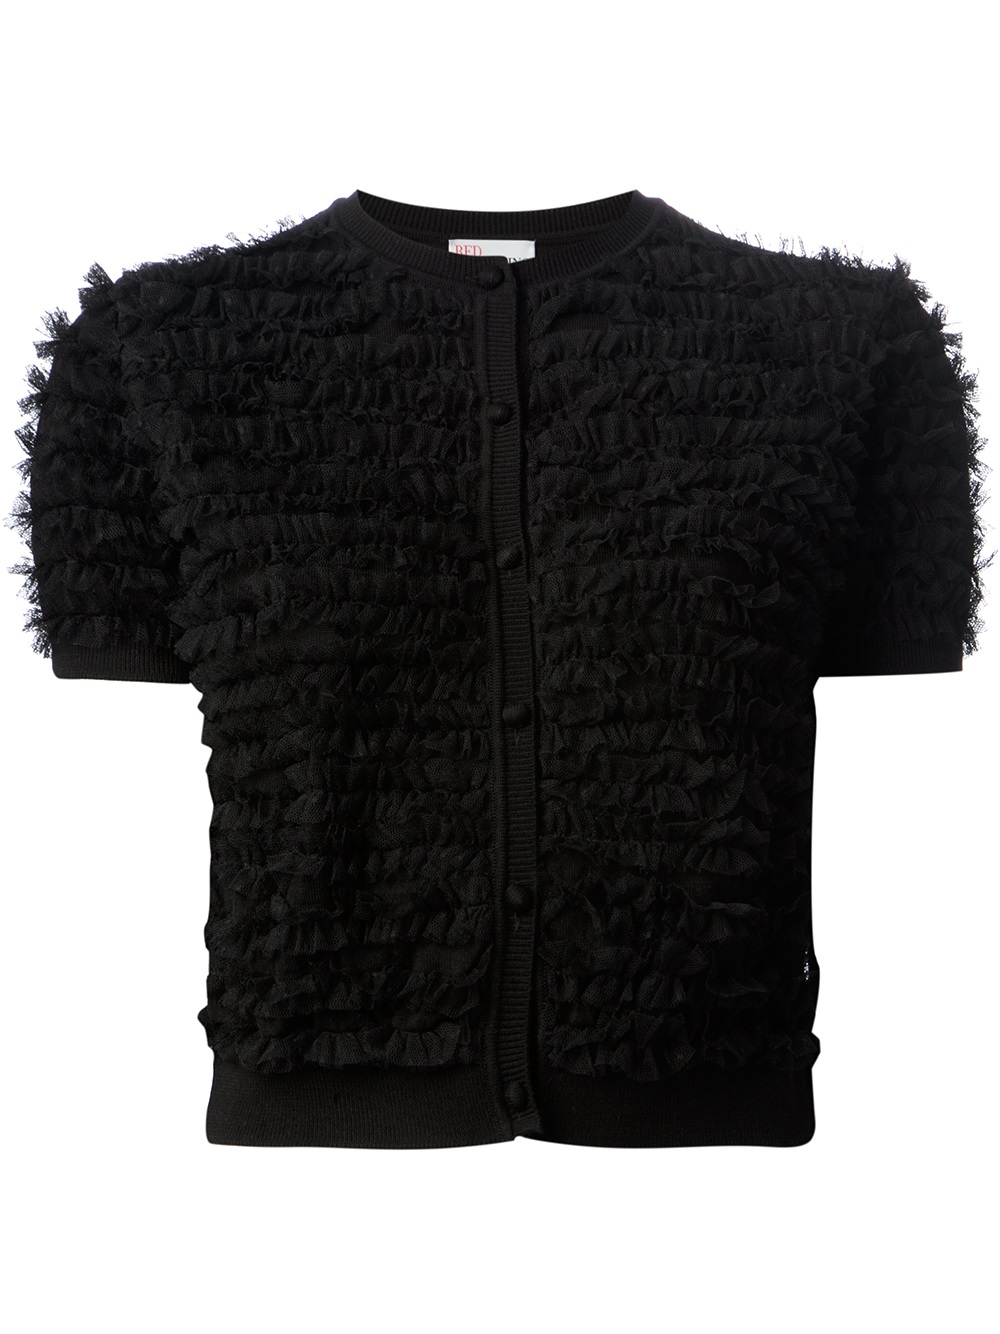 Red valentino Frilled Lace Cardigan in Black | Lyst